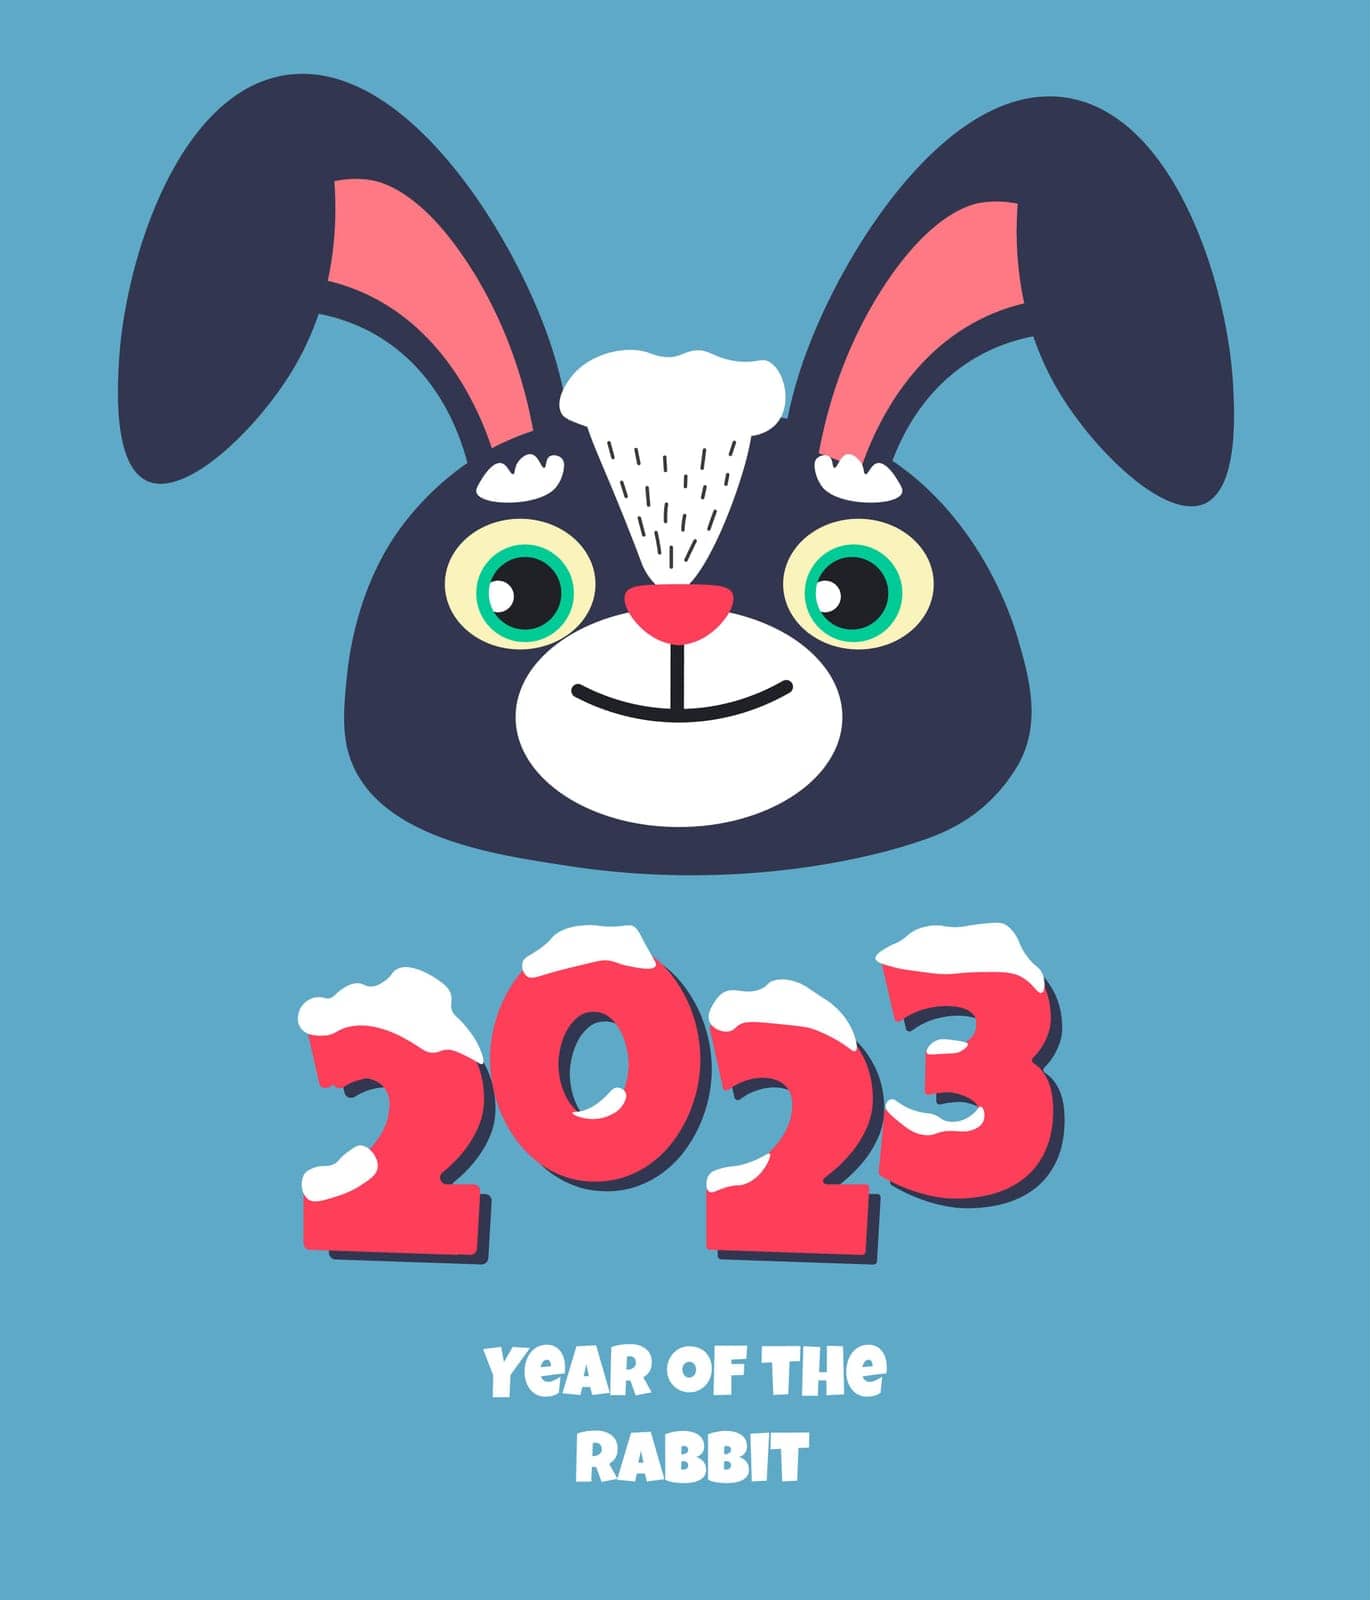 Rabbit personage, year of bunny. Isolated cute animal muzzle with smiling facial expression. Mammal with long ears and cute eyes. Cartoon character symbol of 2023 year, vector in flat illustration